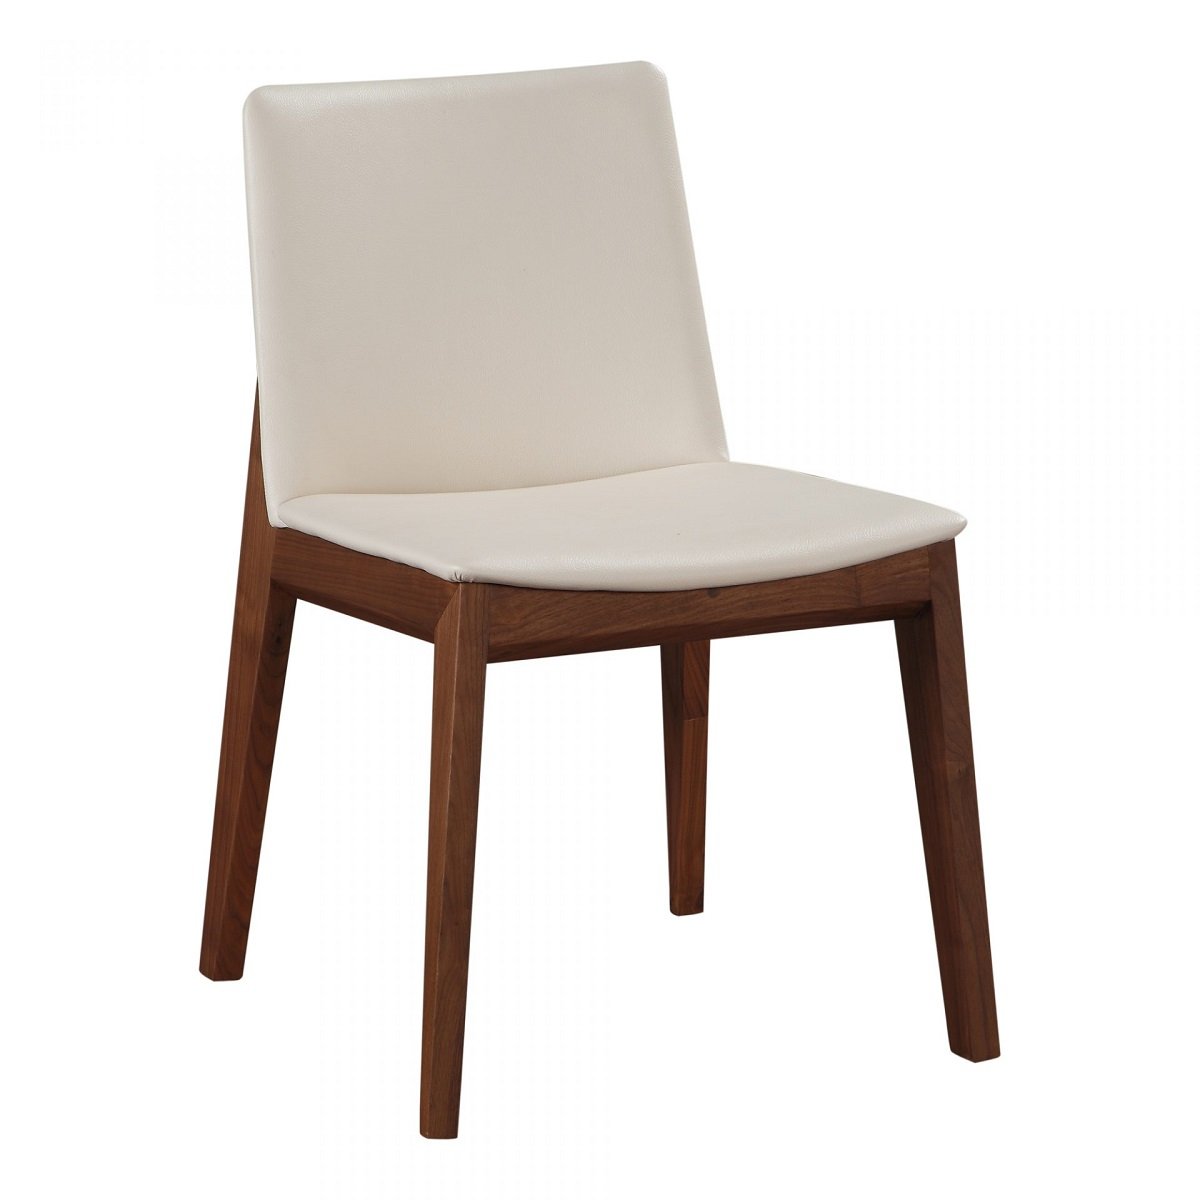 Load image into Gallery viewer, Deco Dining Chair White Pvc-M2 (Set of 2) Dining Chairs Moe&amp;#39;s     Four Hands, Burke Decor, Mid Century Modern Furniture, Old Bones Furniture Company, Old Bones Co, Modern Mid Century, Designer Furniture, https://www.oldbonesco.com/
